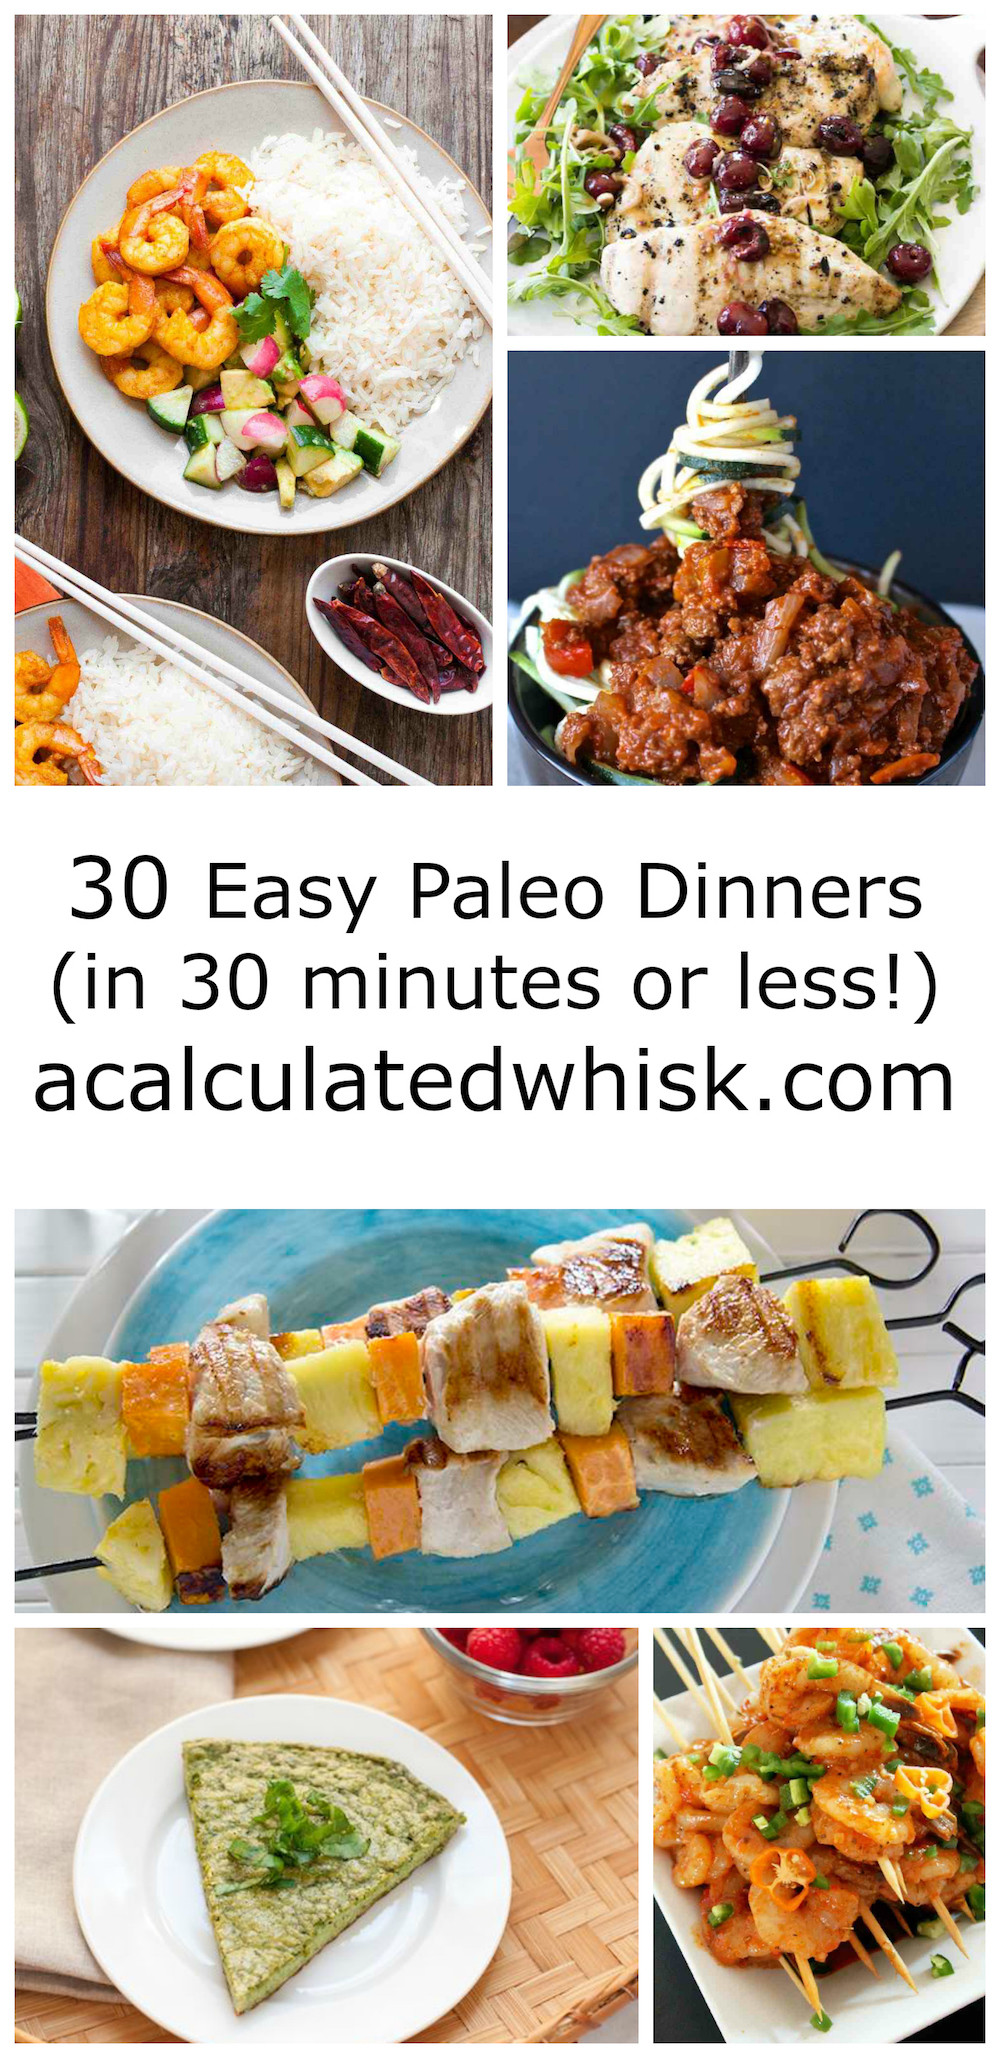 Healthy Paleo Dinners
 30 Easy Paleo Dinners in 30 minutes or less A